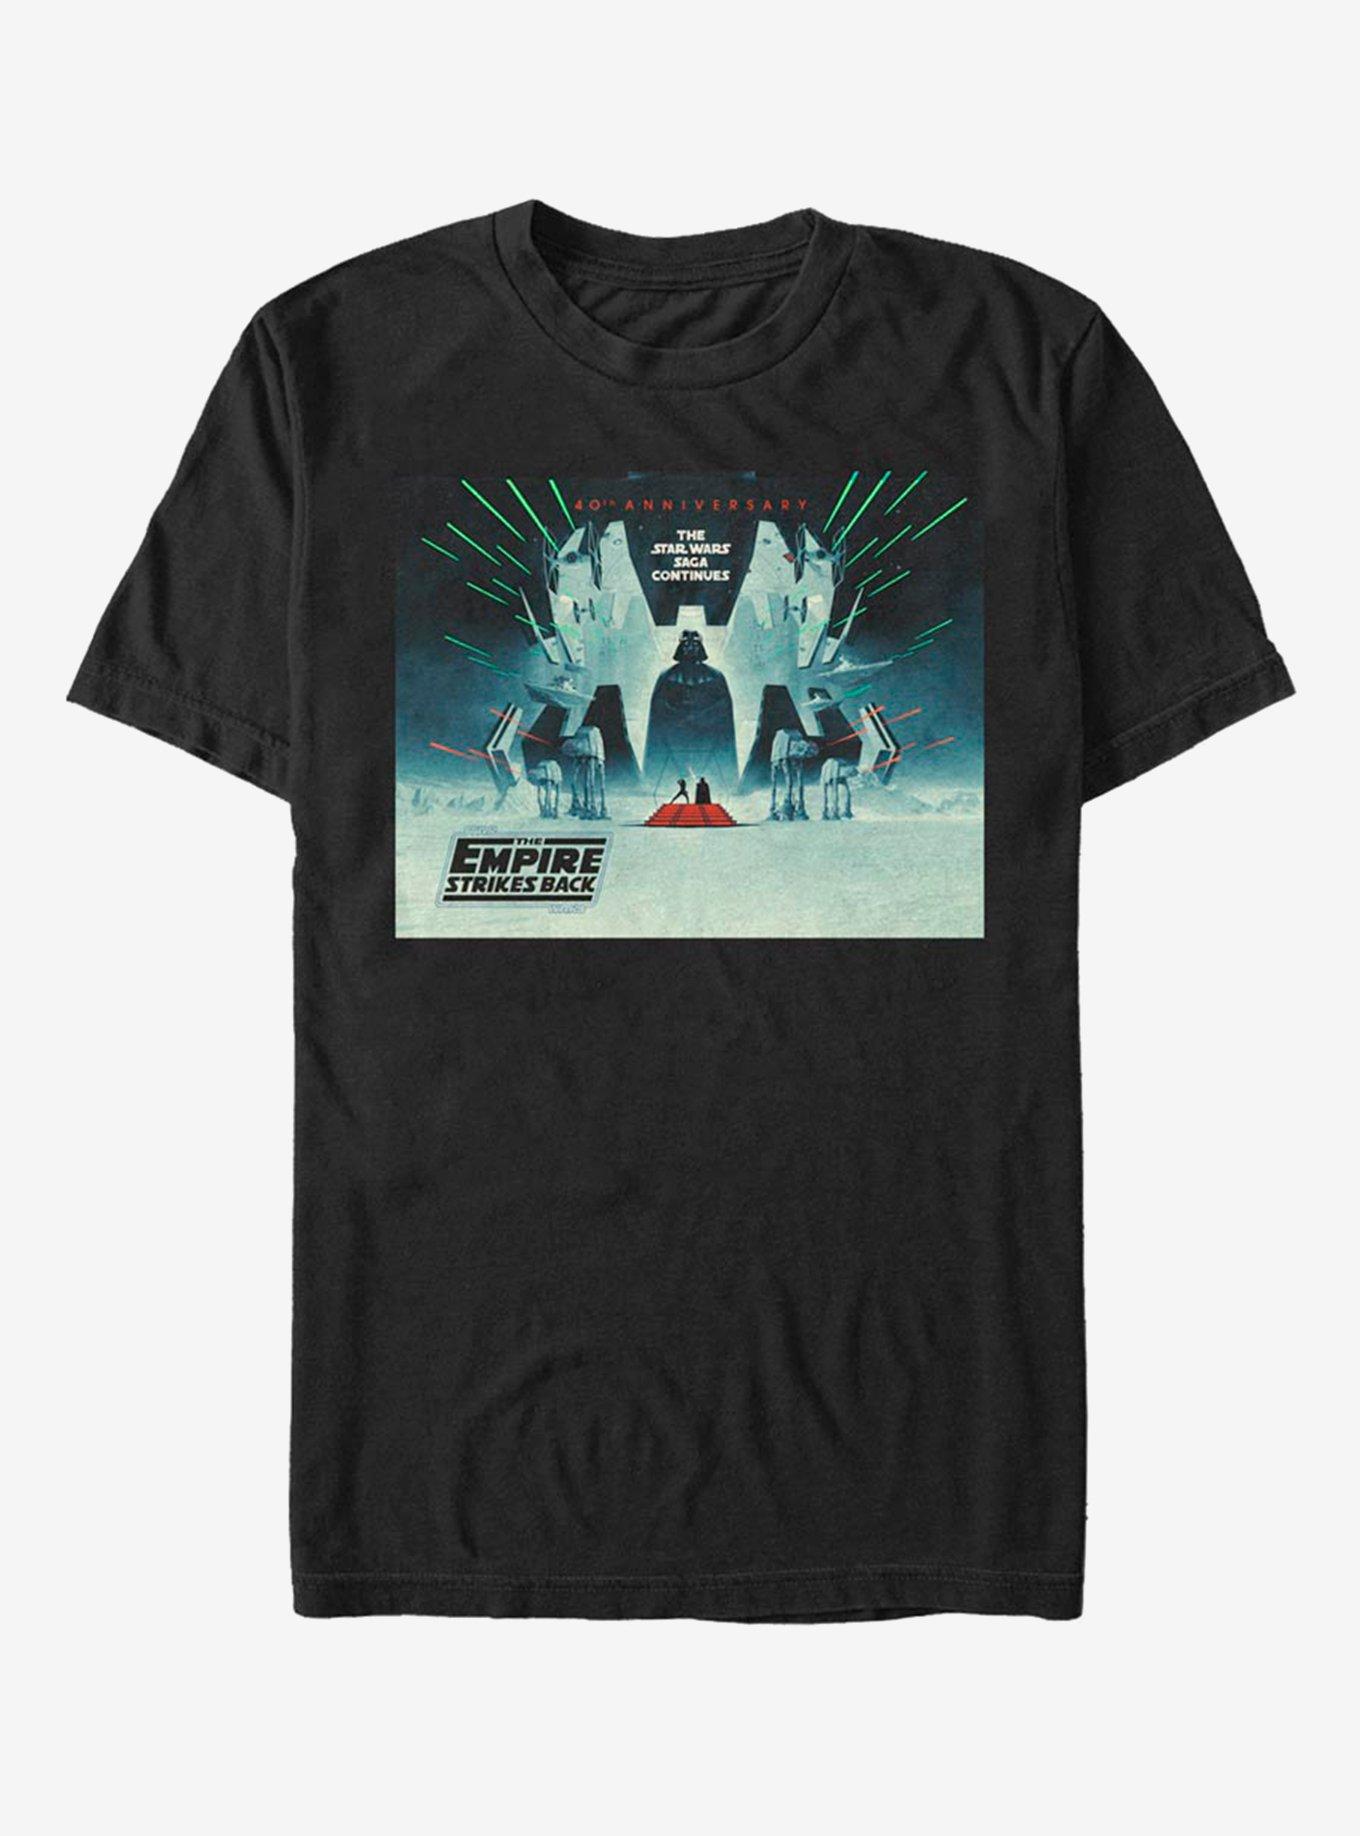 Star Wars Episode V: The Empire Strikes Back 40th Anniversary Wide Poster T-Shirt, BLACK, hi-res